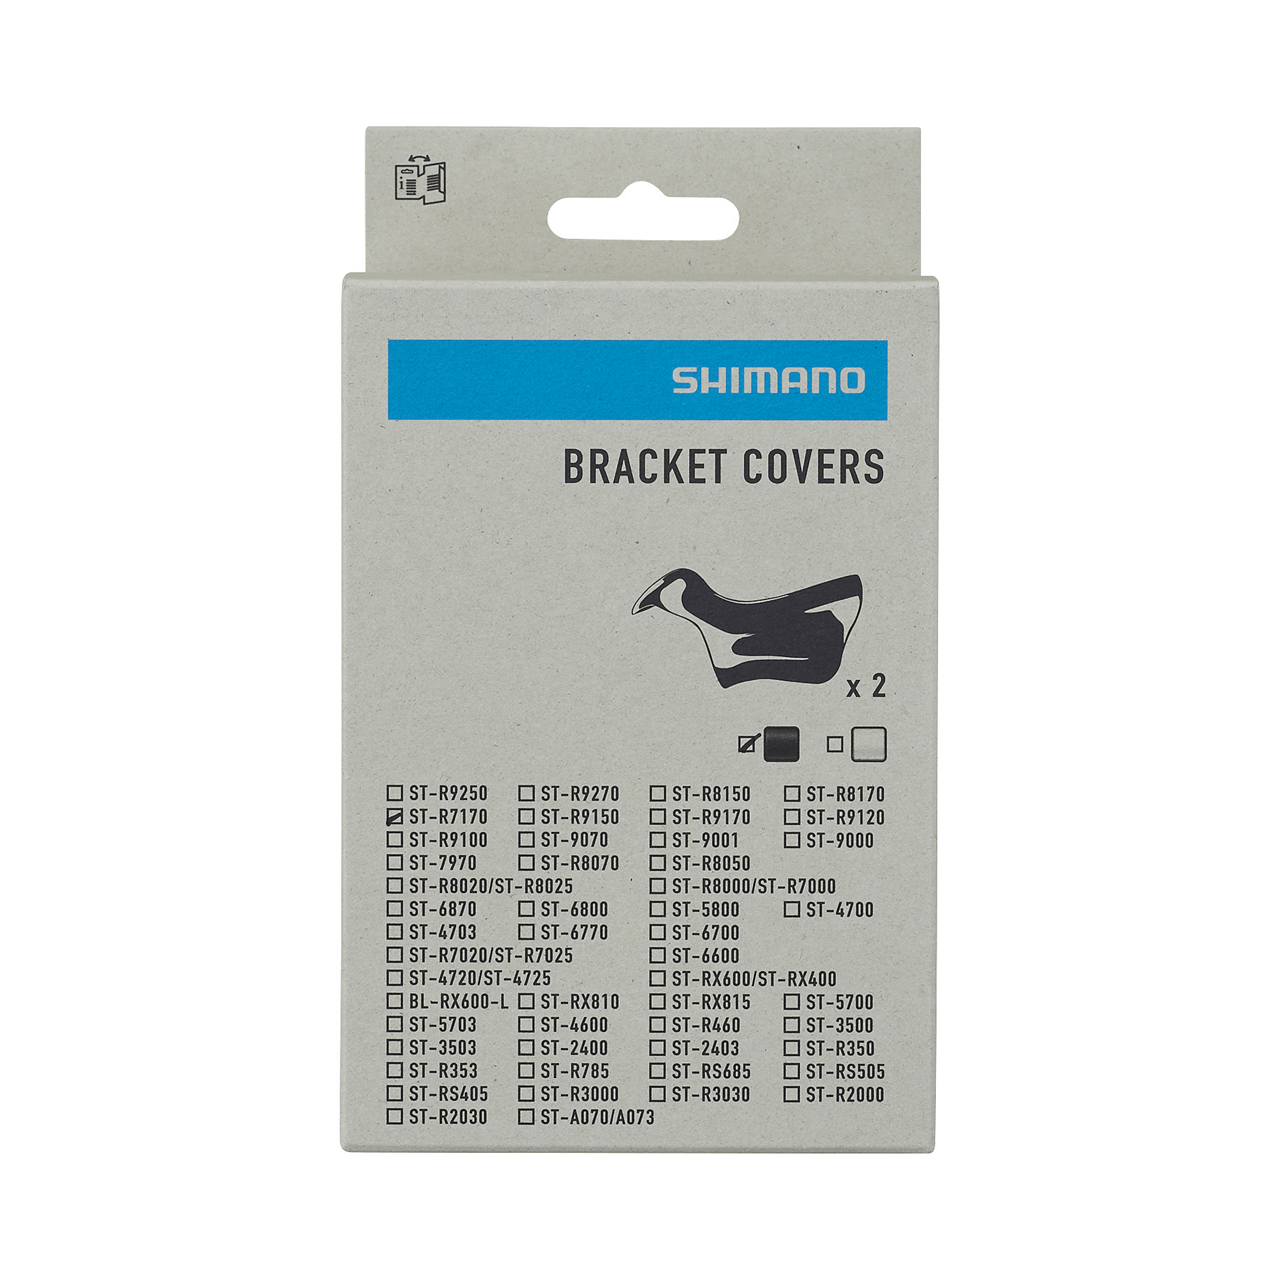 Shimano Bracket Cover (ST-R7100) (ST-R7170)